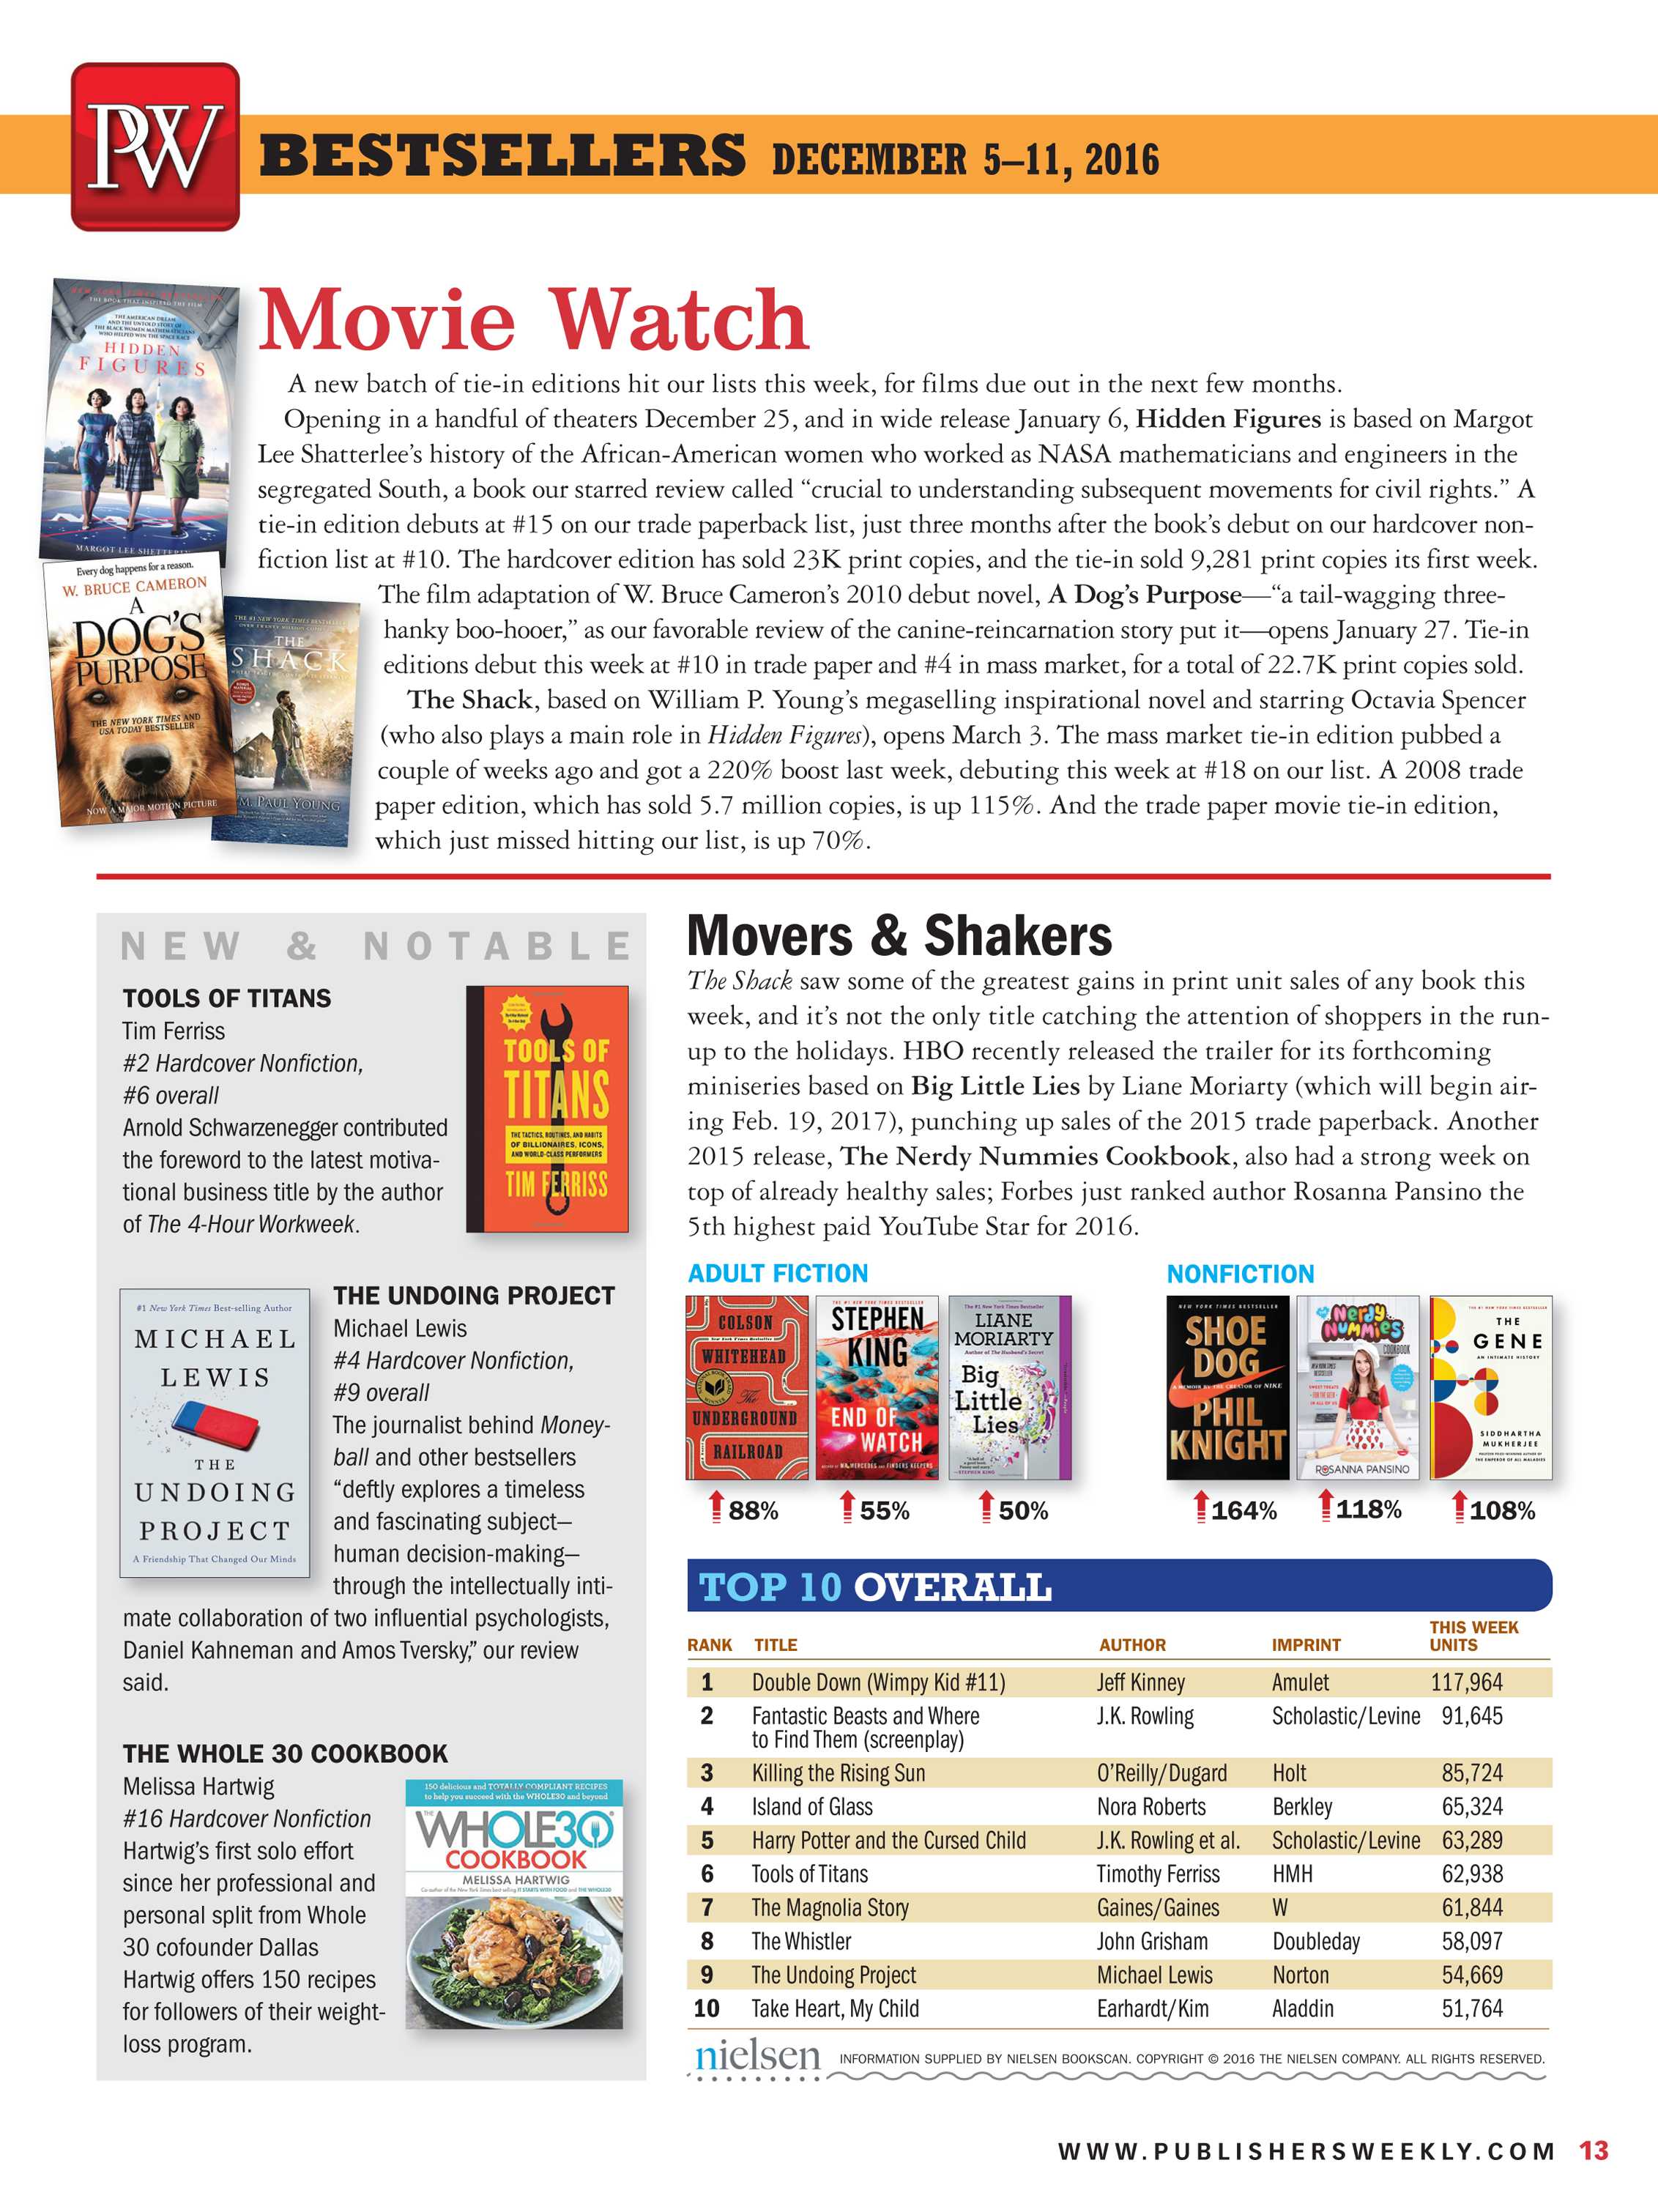 Publishers Weekly - December 19, 2016 - page 13